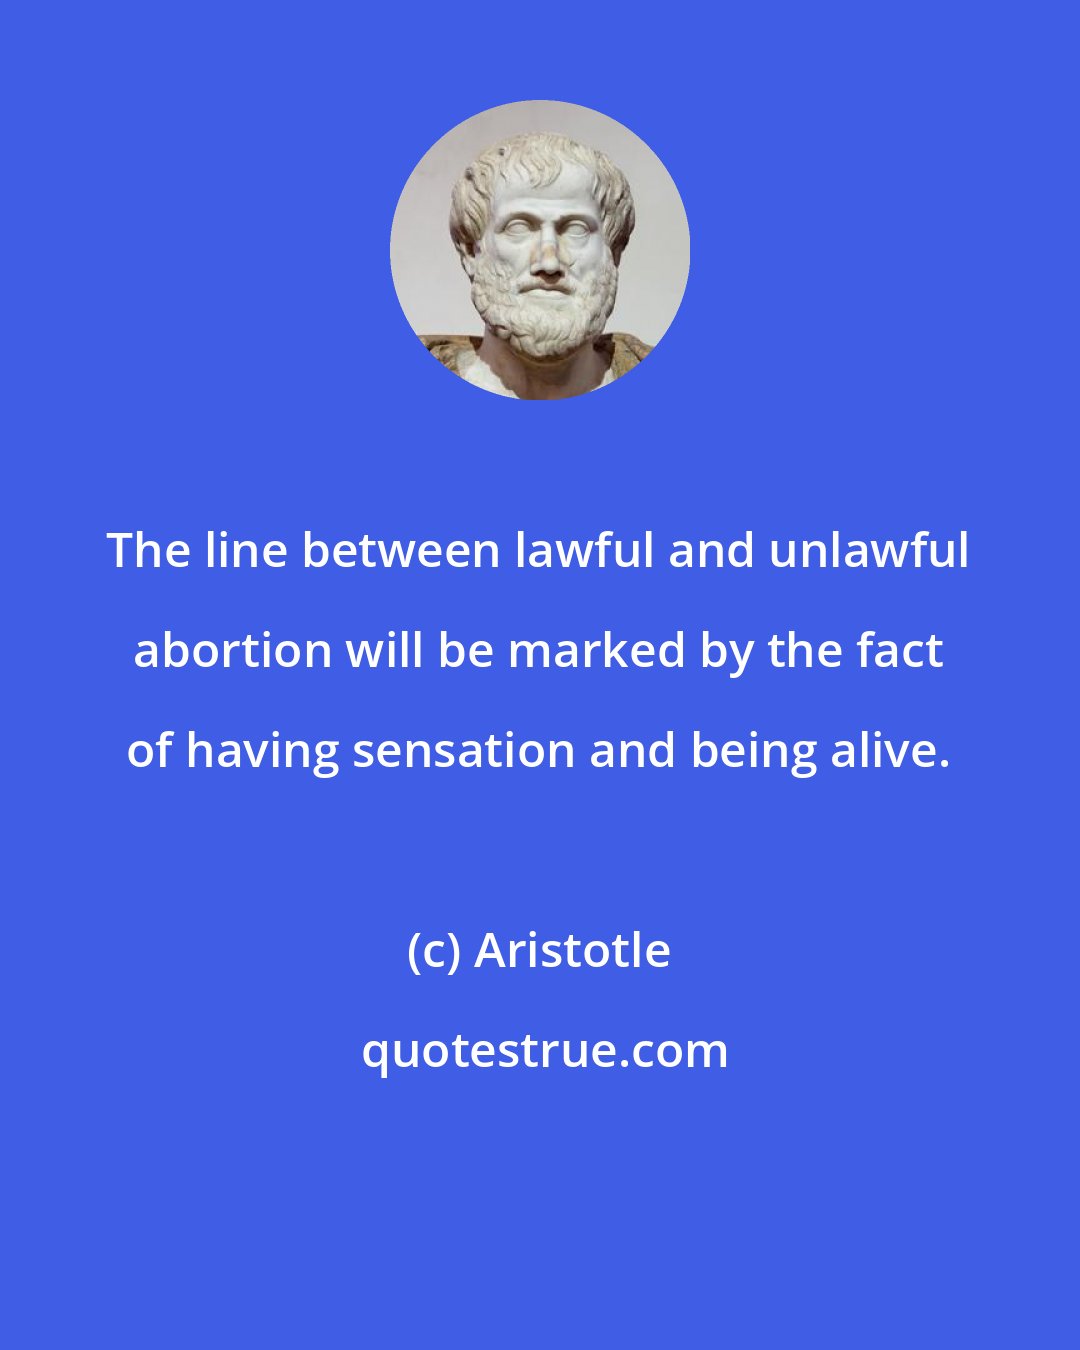 Aristotle: The line between lawful and unlawful abortion will be marked by the fact of having sensation and being alive.